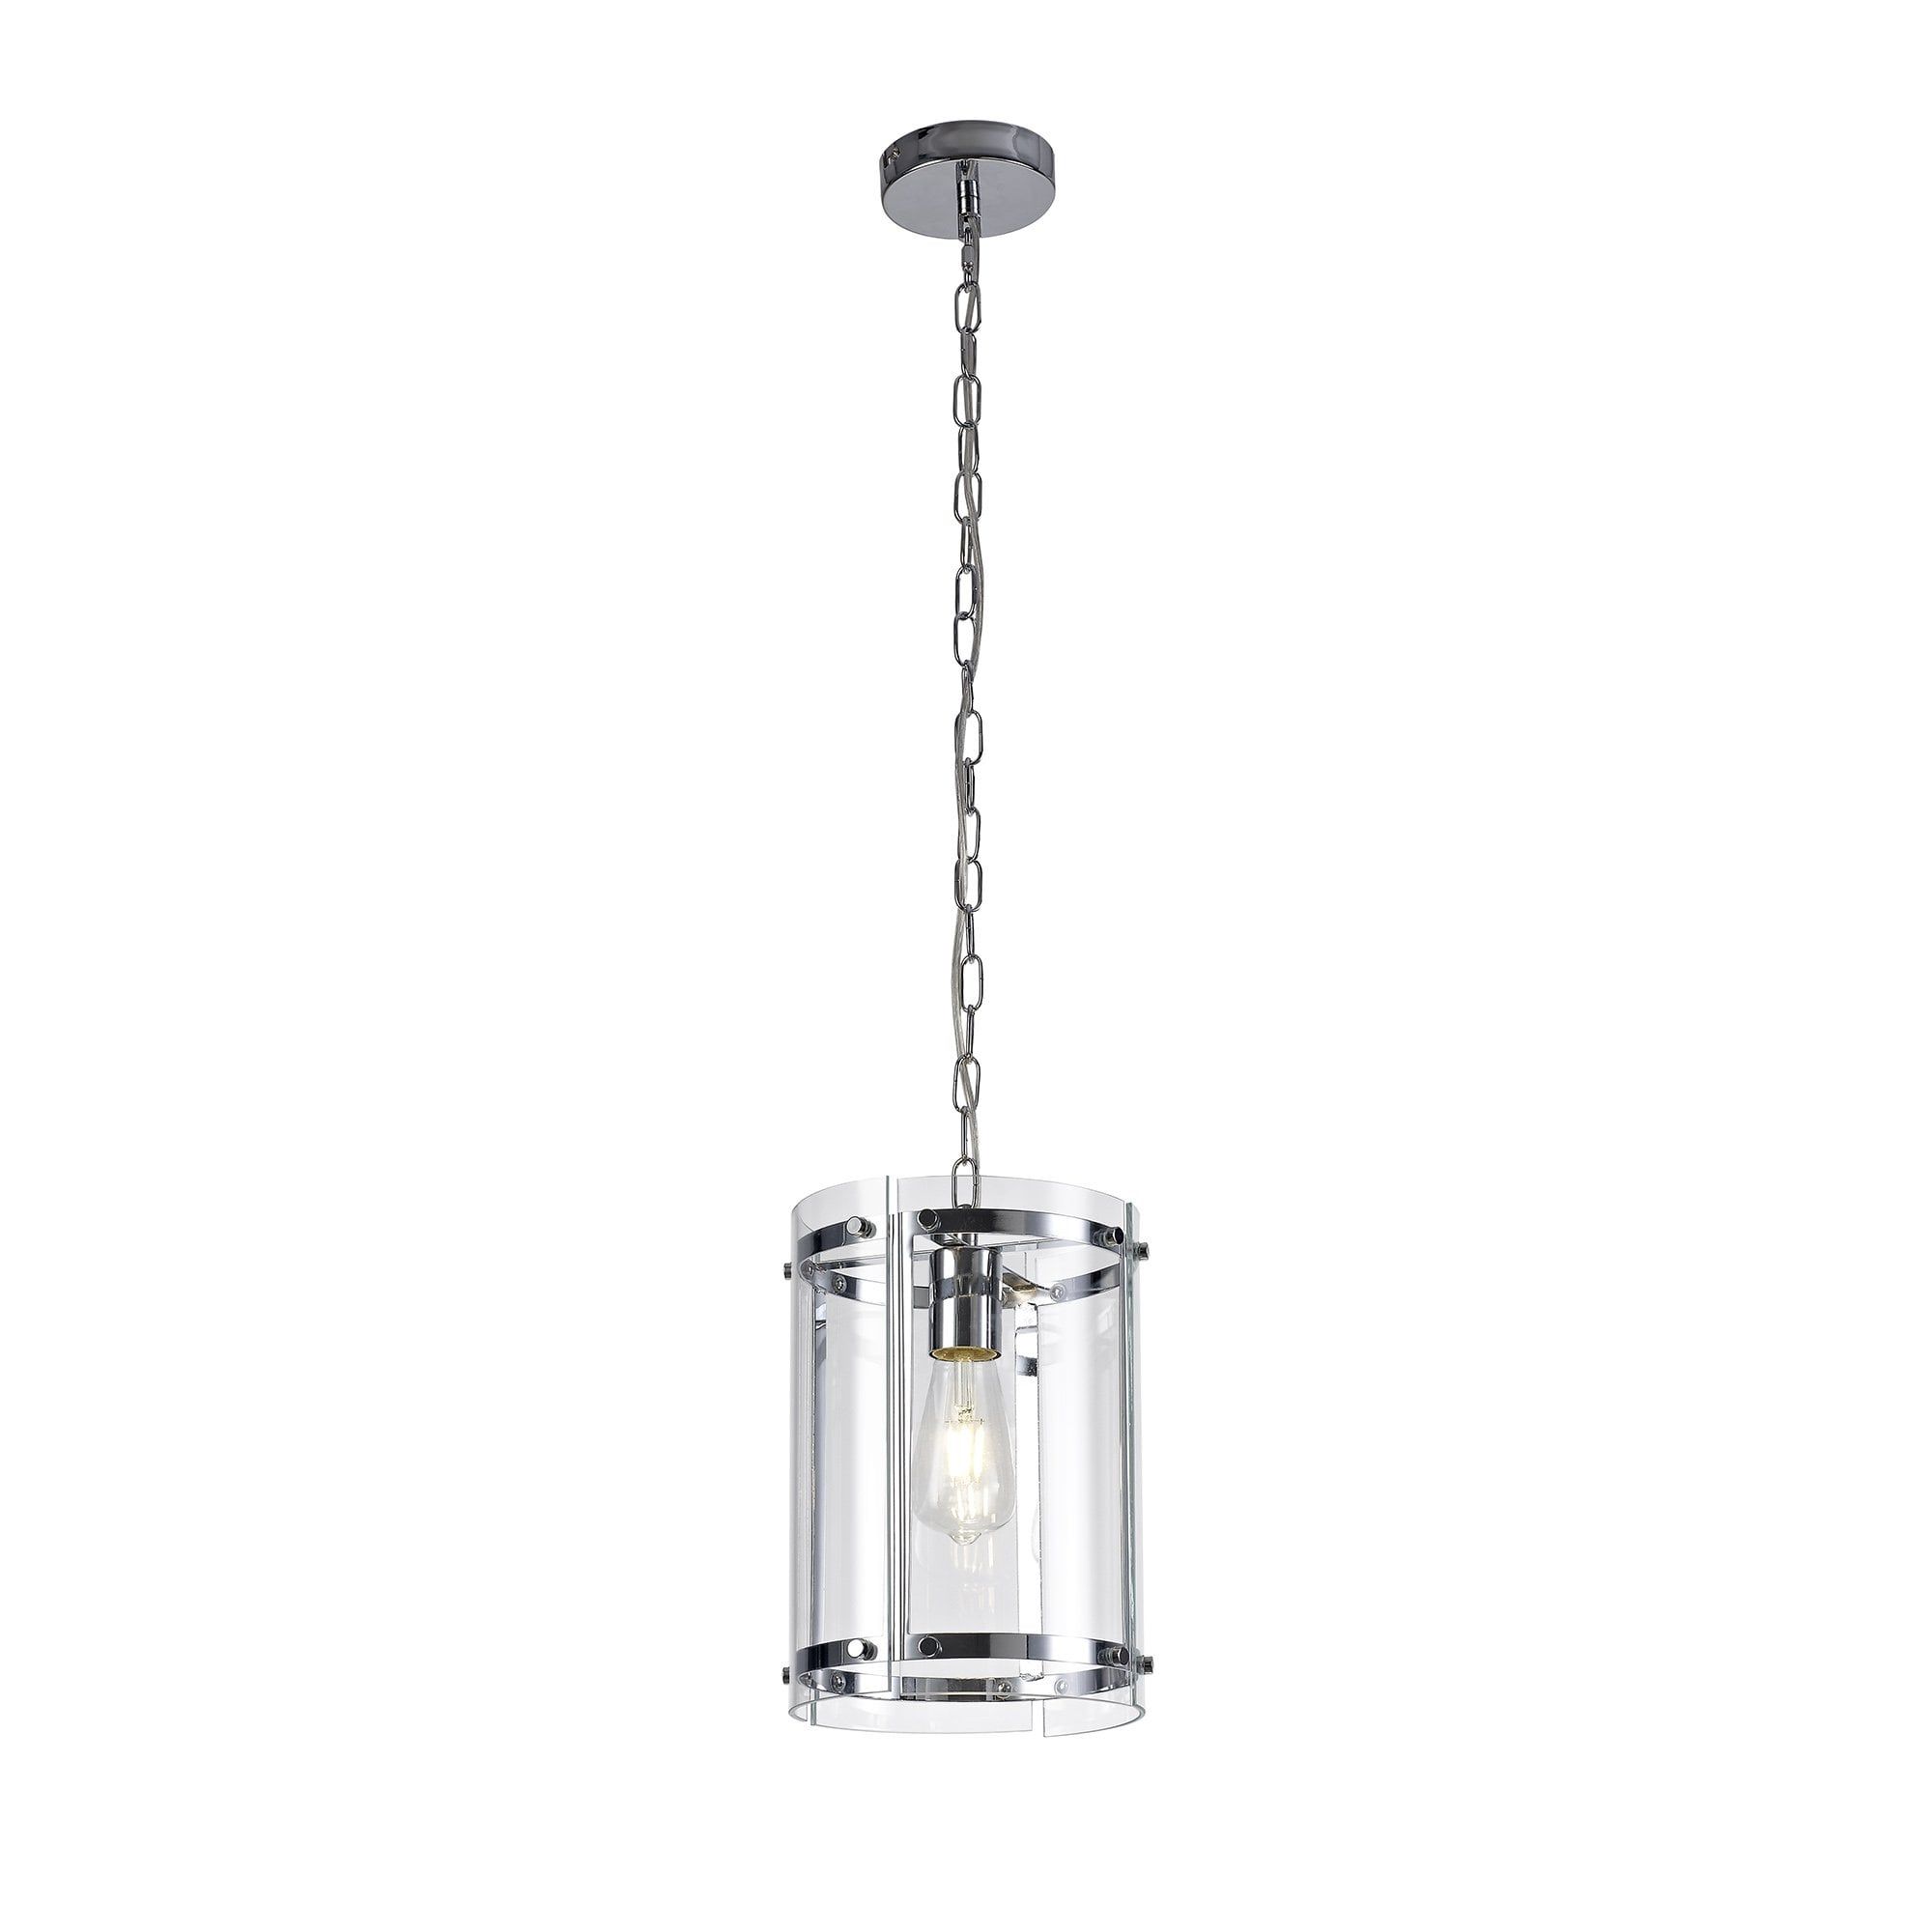 Latest Ceiling Pendant Lantern In Polished Chrome With Glass Panels For Lantern Chandeliers With Clear Glass (View 10 of 15)